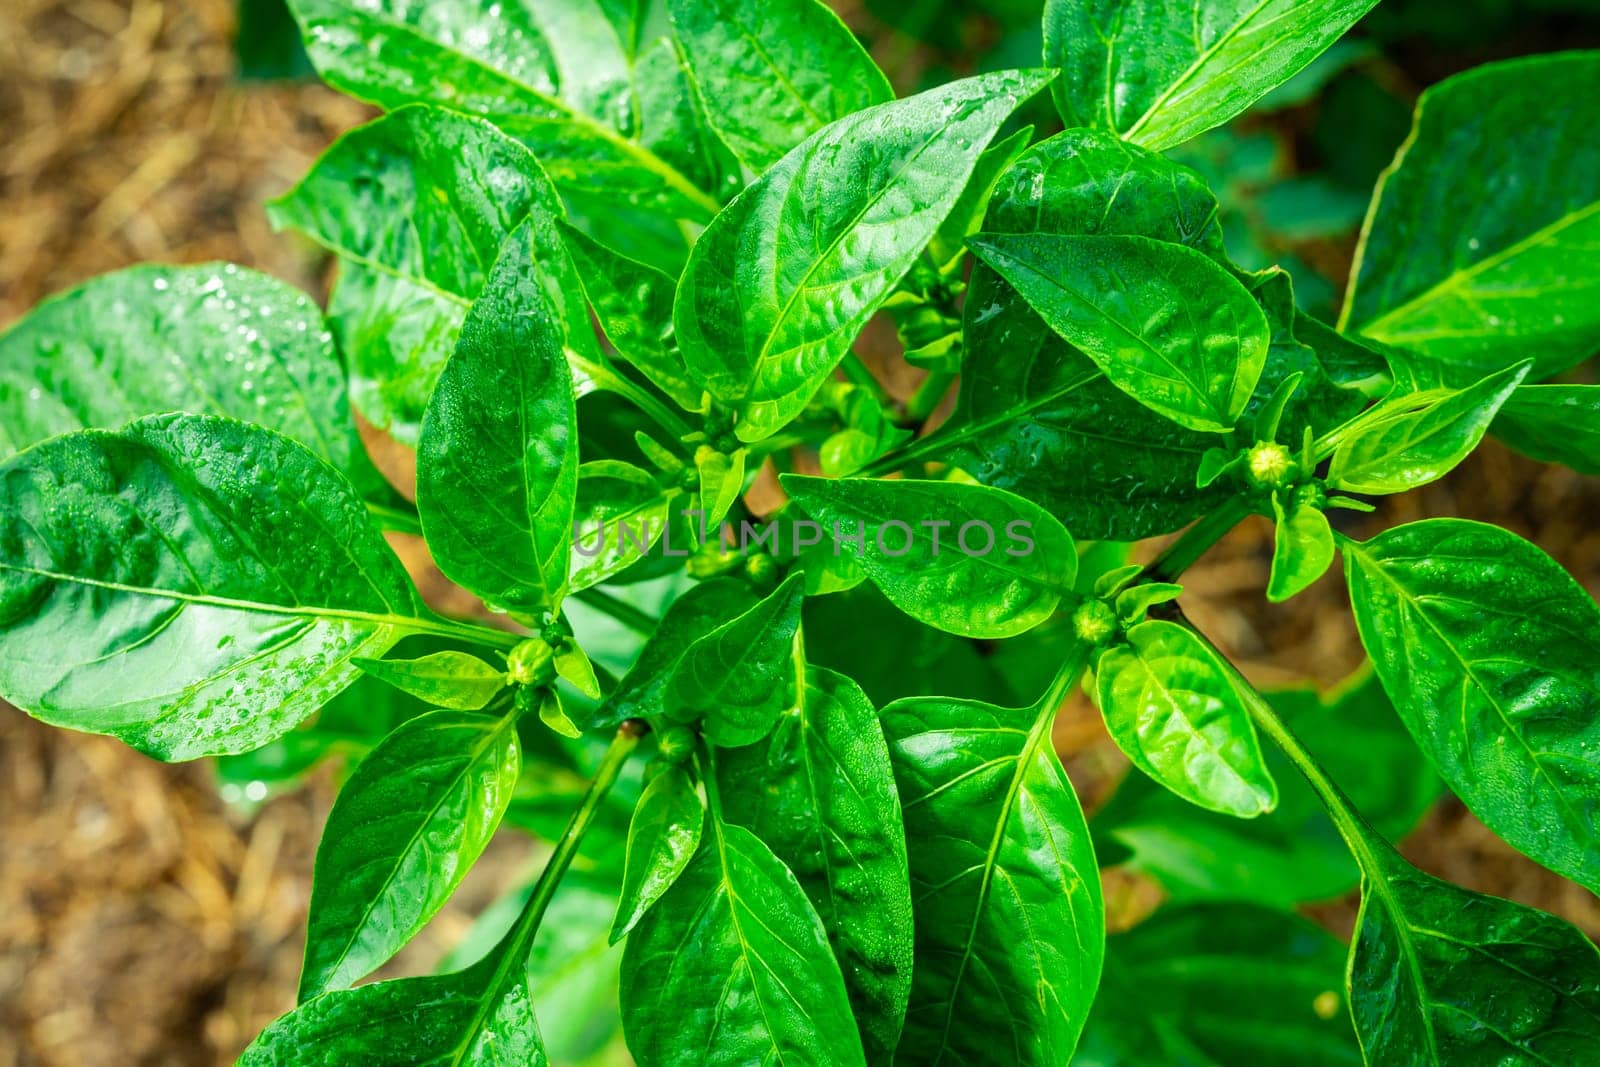 Green pepper plant close-up. View from above.